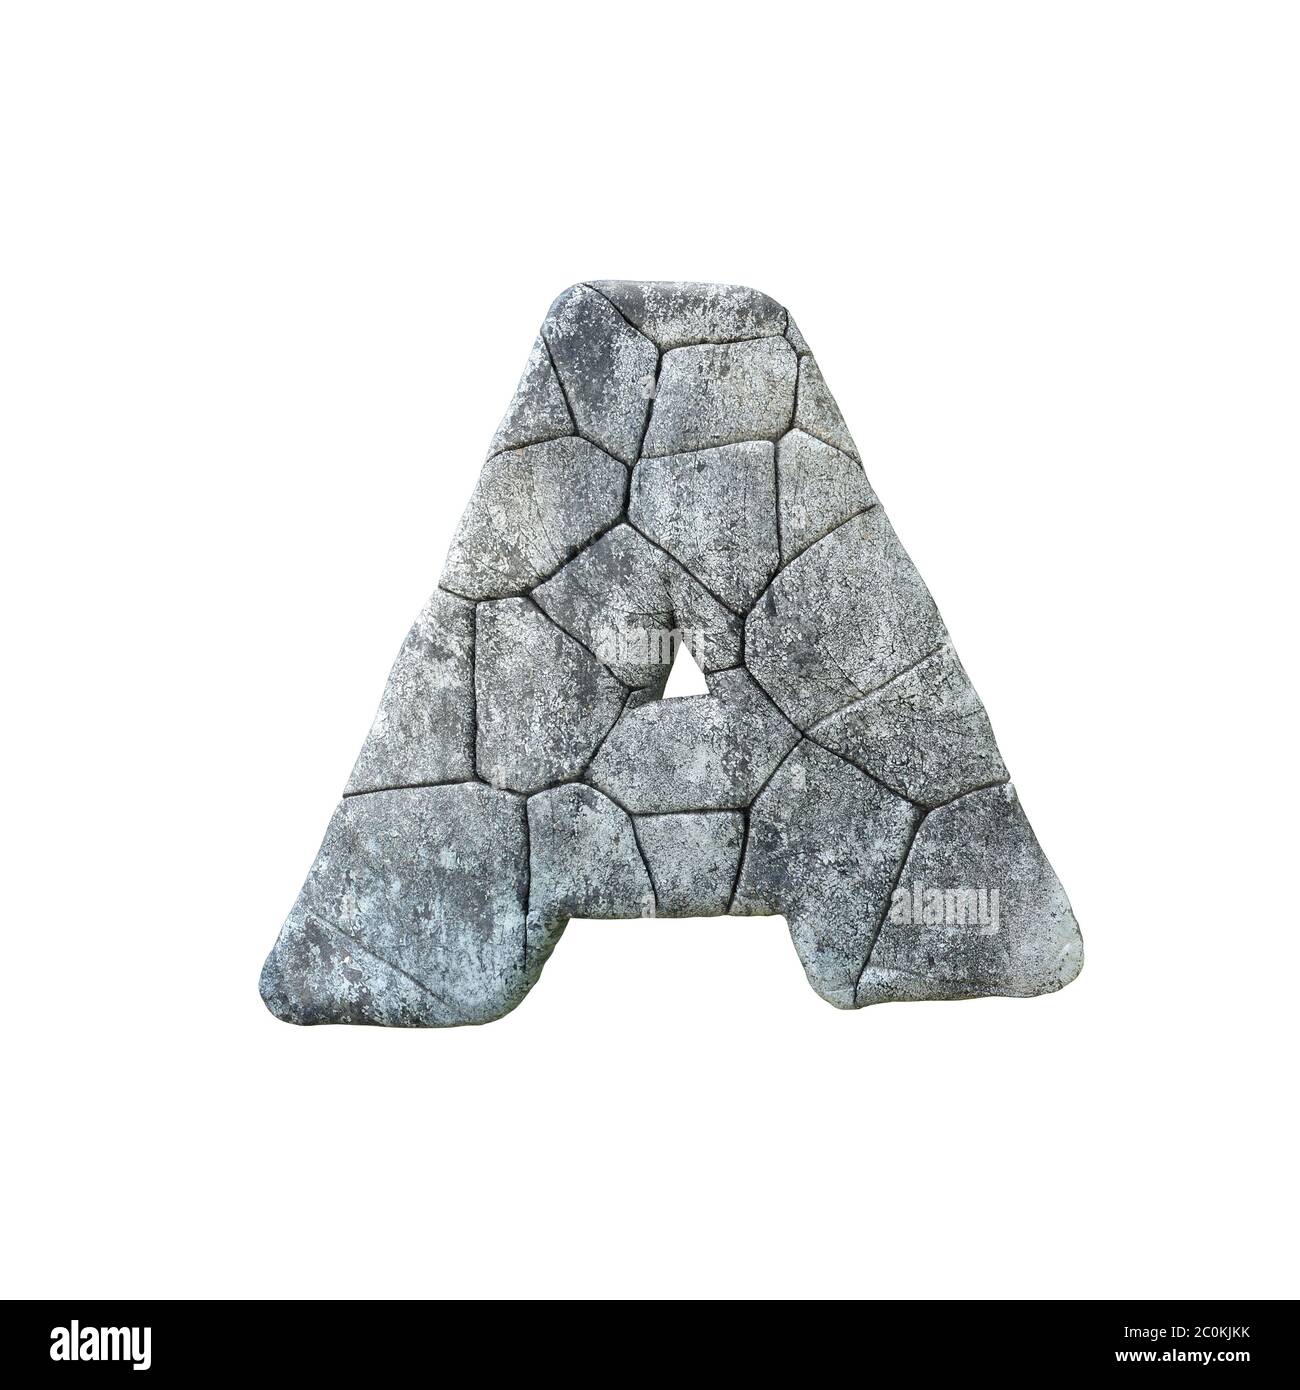 Letter A cracked grunge stone rock font 3D Rendering Stock Photo